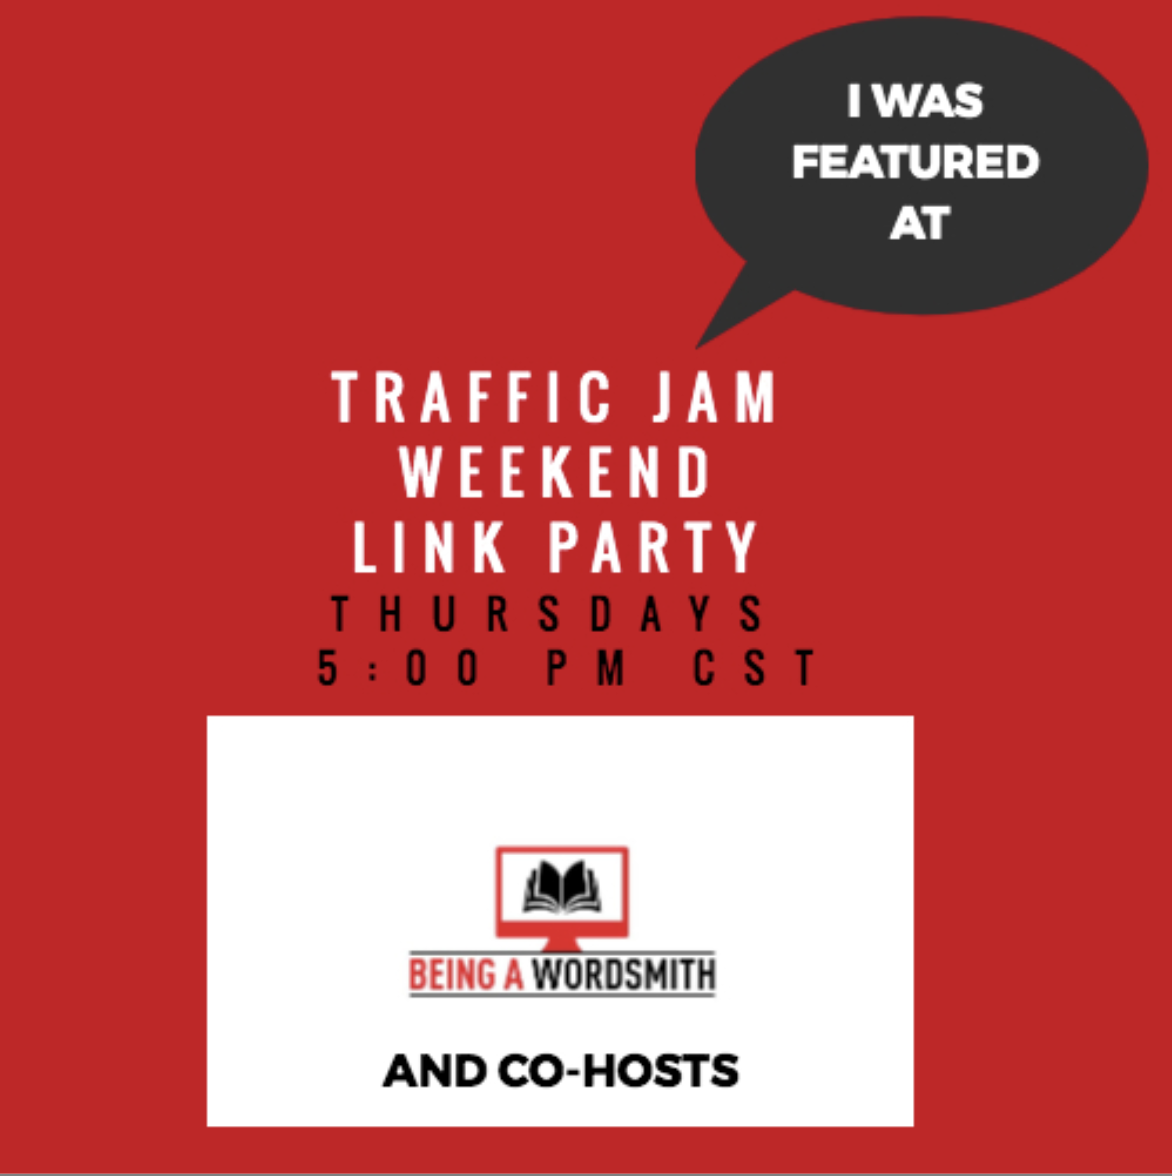 I was featured at the Traffic Jam Weekend Link Party.png